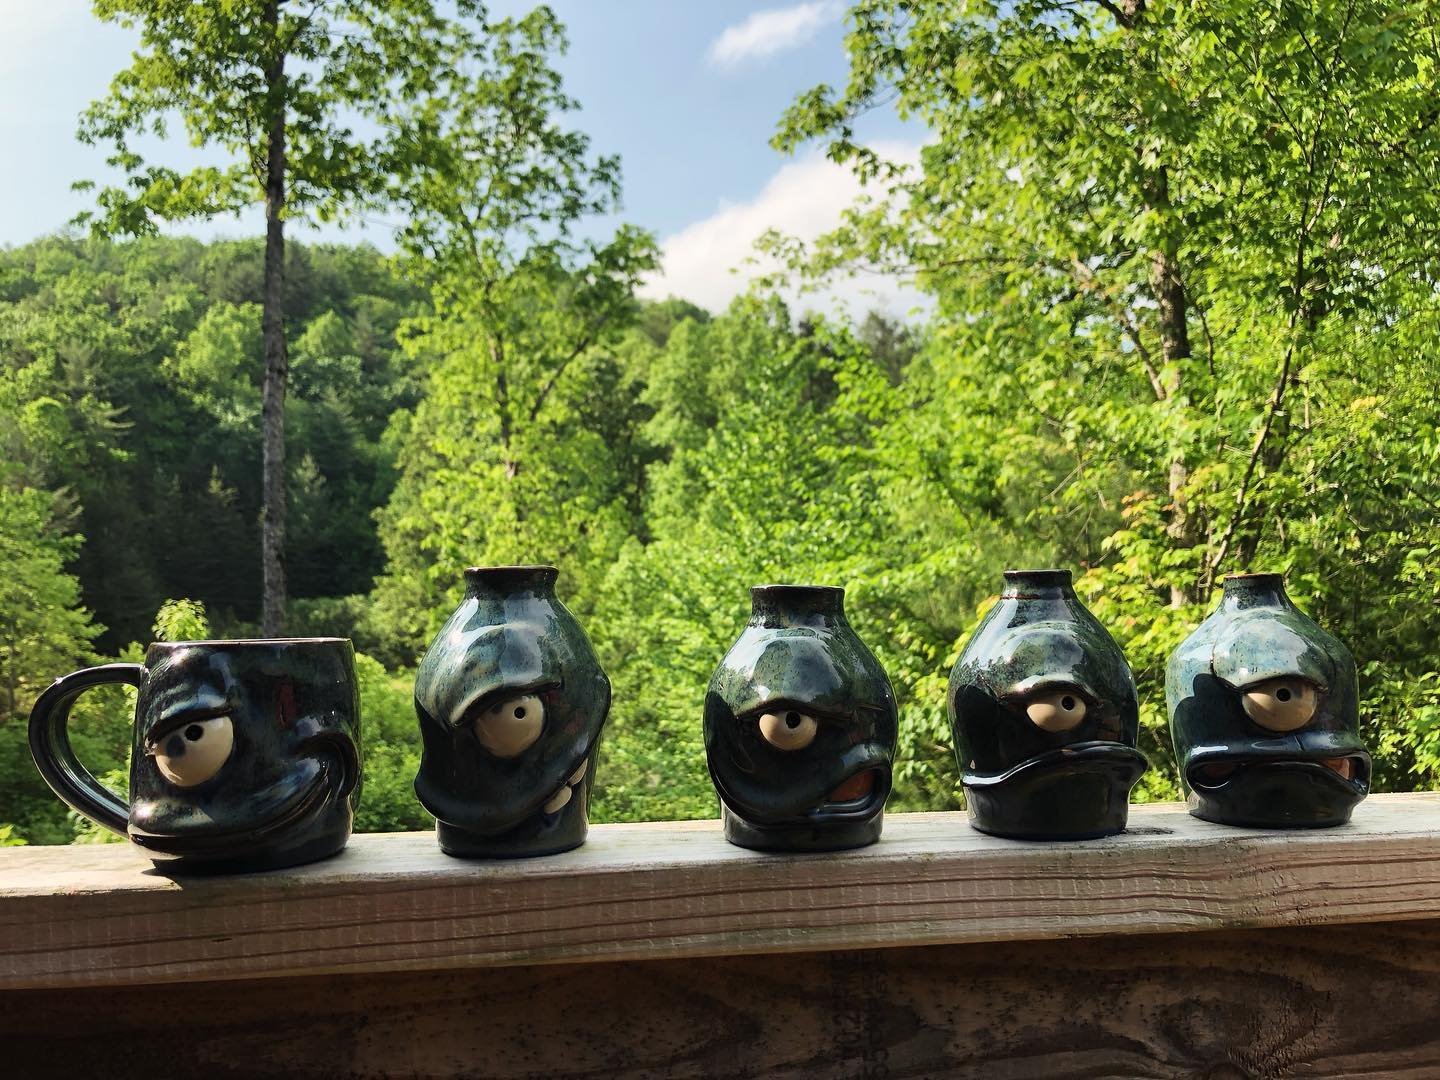 Got a set of small bottle vase (and a mug) faces covered in floating blue. 

Trying new glazing techniques with the faces so I&rsquo;m. It just underglazing and clear glazing. I had varying success on these, but collectively, they are pretty cool!

2